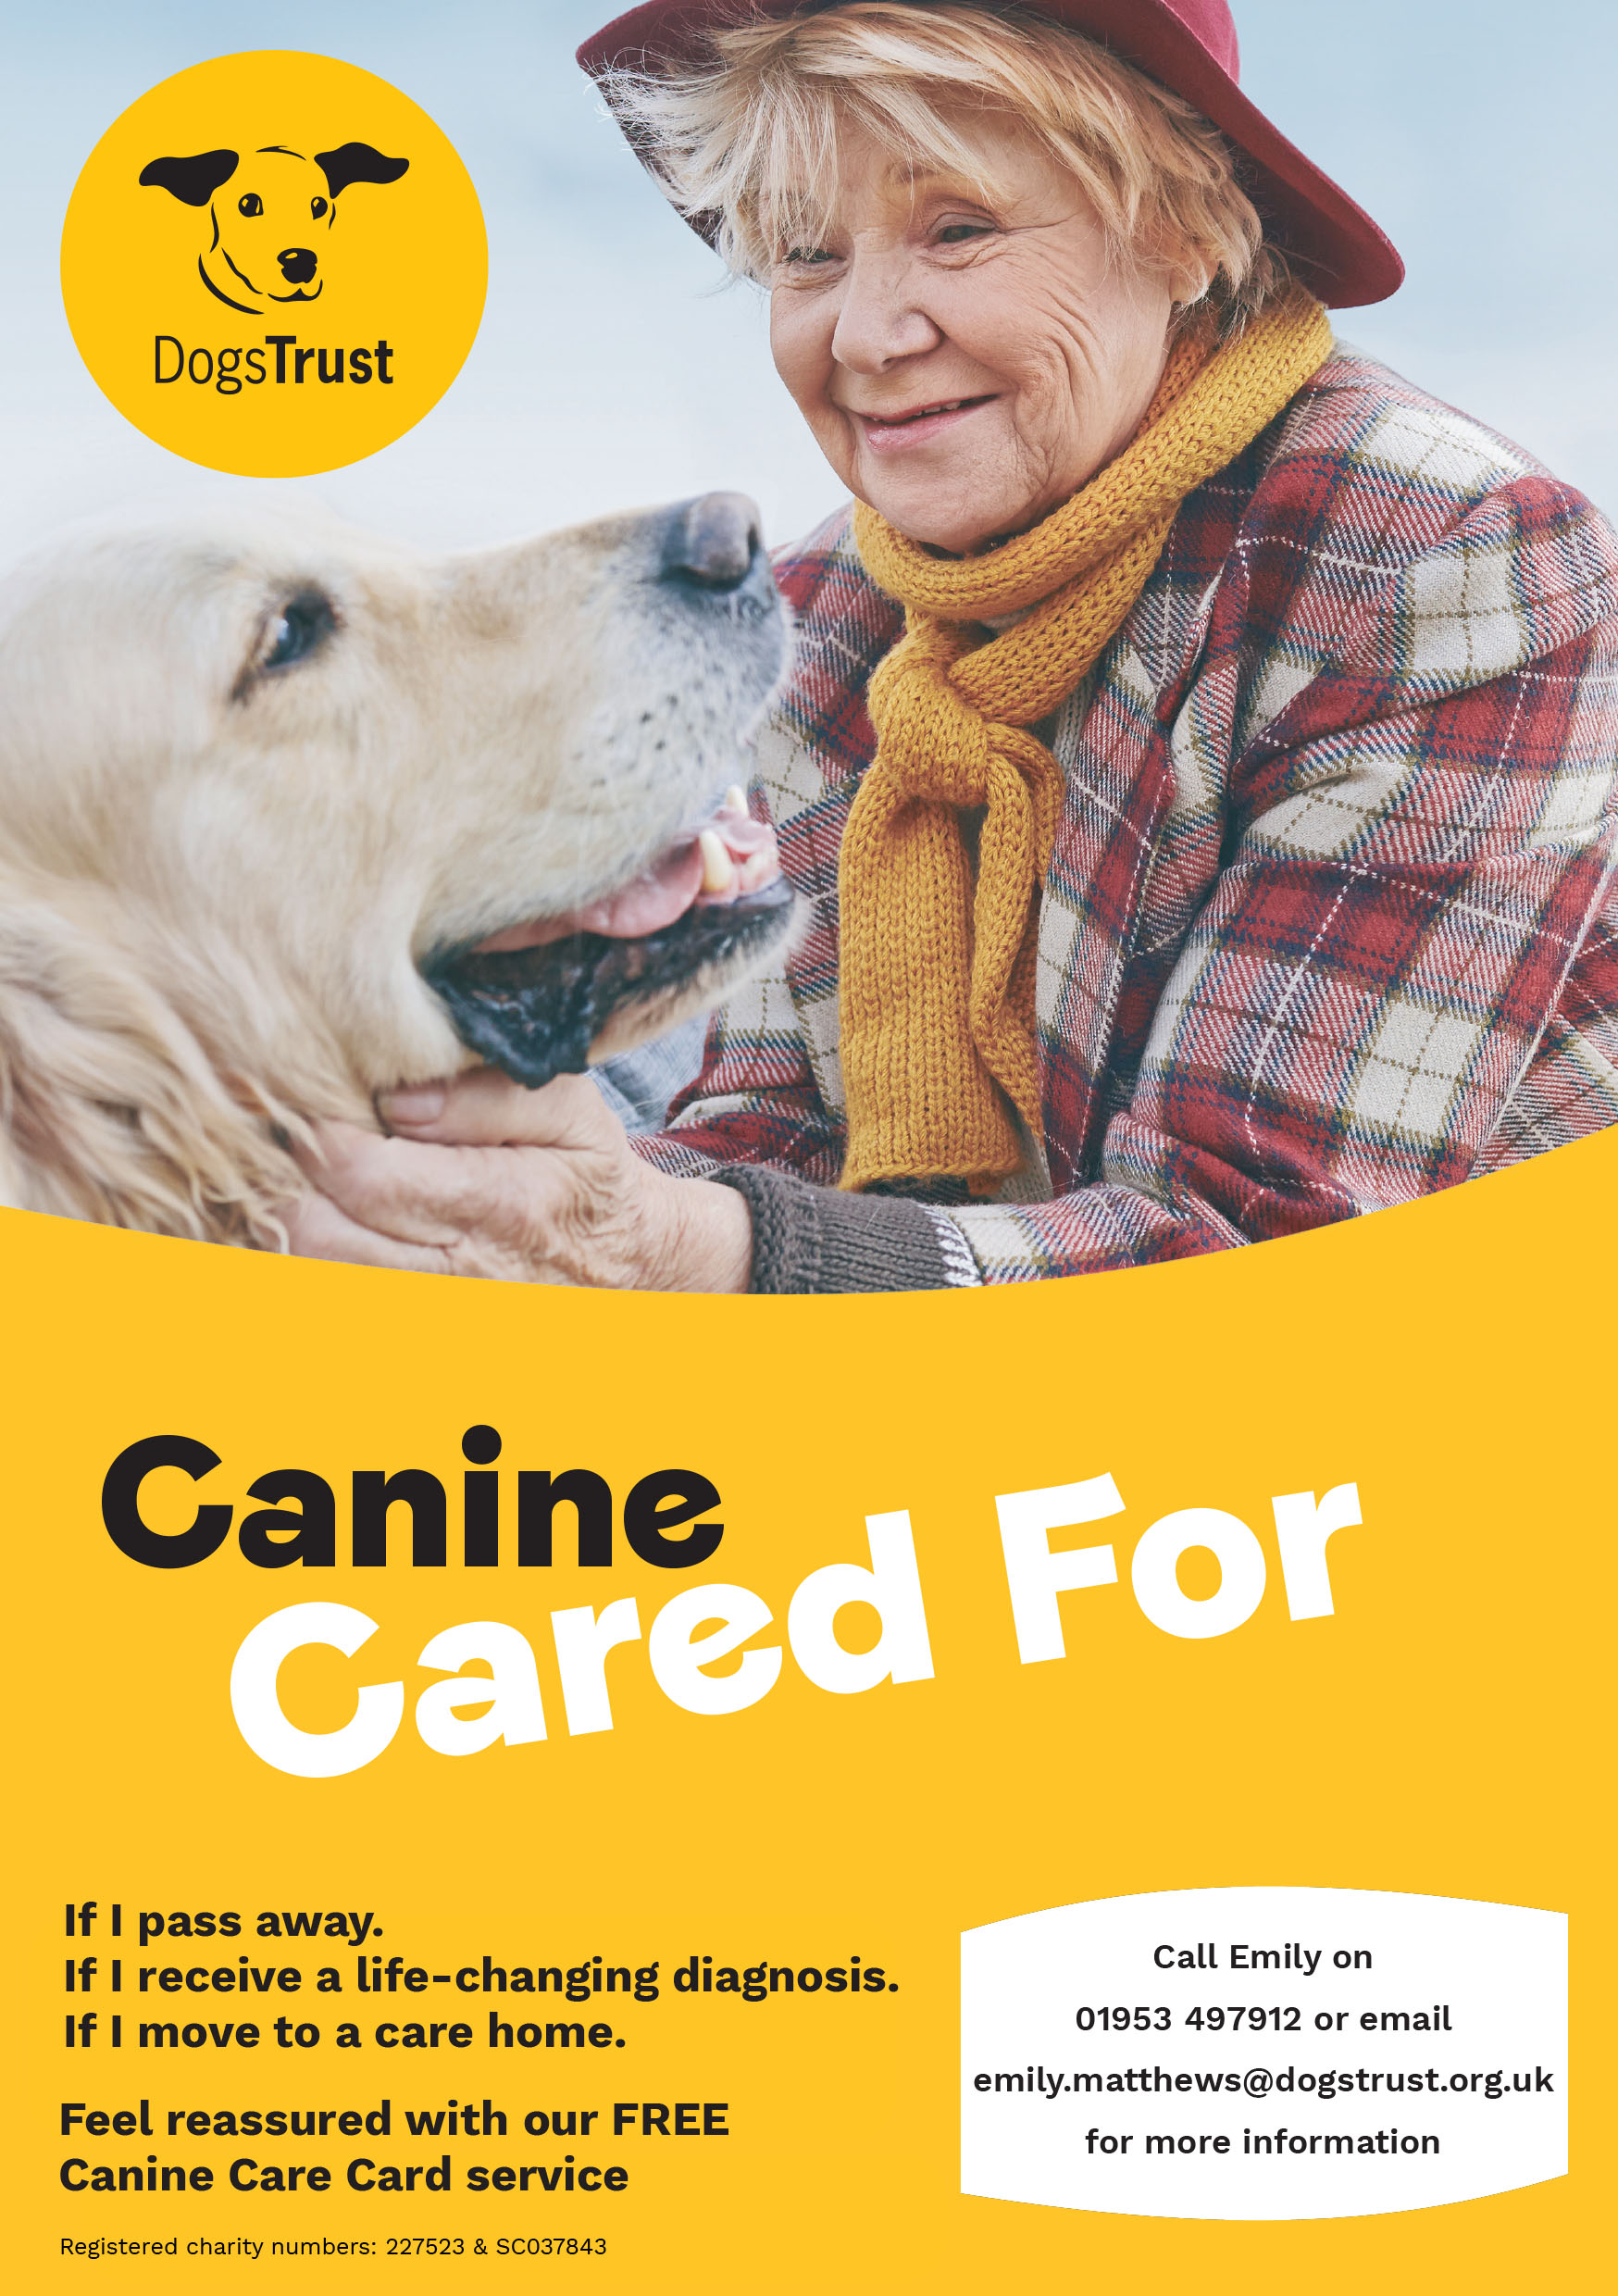 Dogs Trust Canine Cared For Leaflet